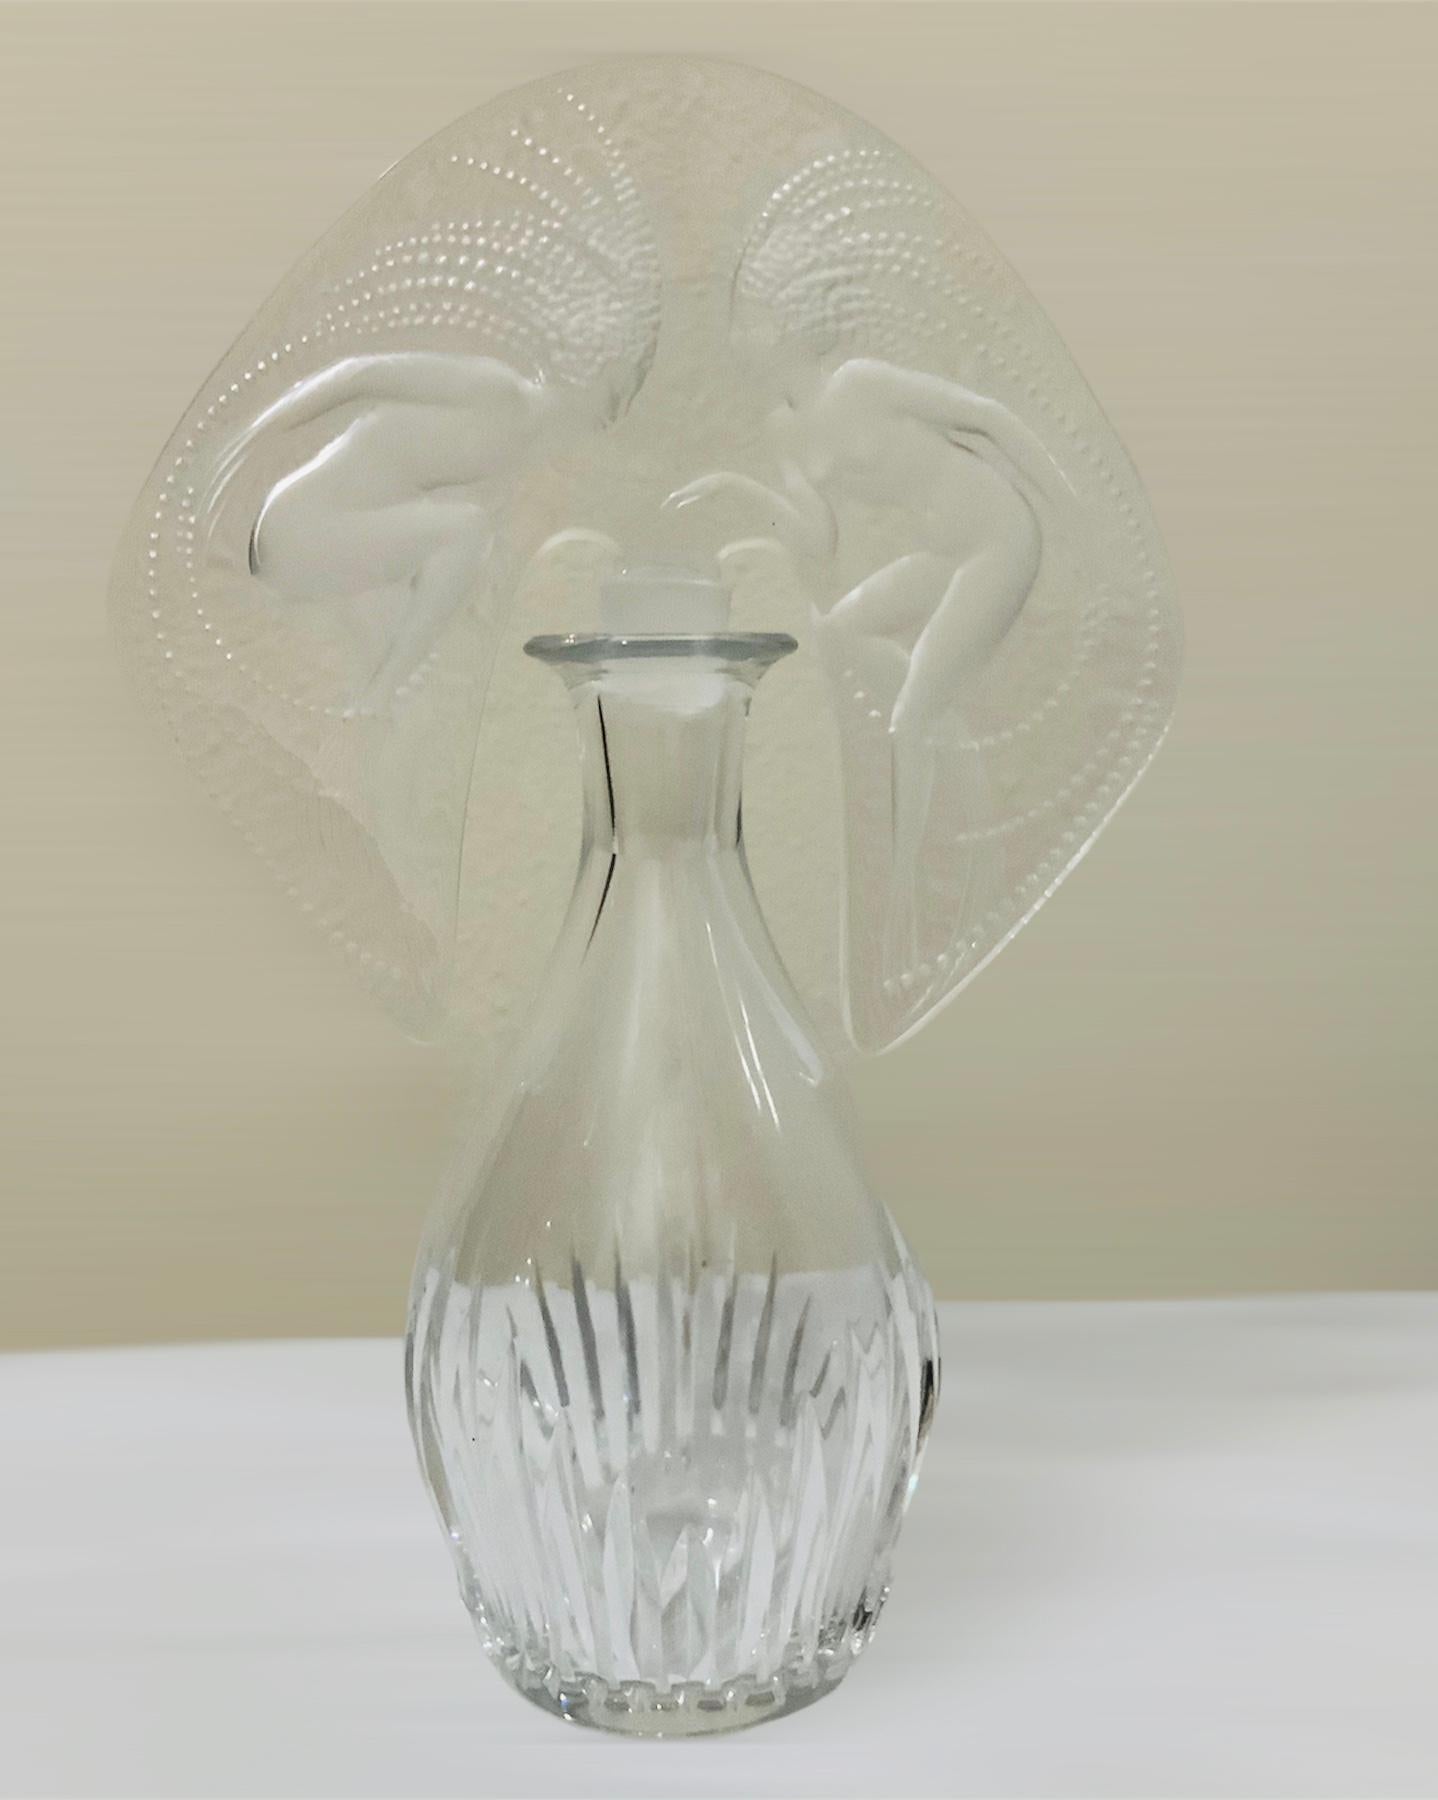 This is a hybrid perfume bottle with a Lalique “Ondines” stopper and Baccarat “Massena” bottle. The stopper is adorned with a pair of water nymphs and is marked with the numbers-507. The Baccarat bottle is clear and it is ribbed at the lower body